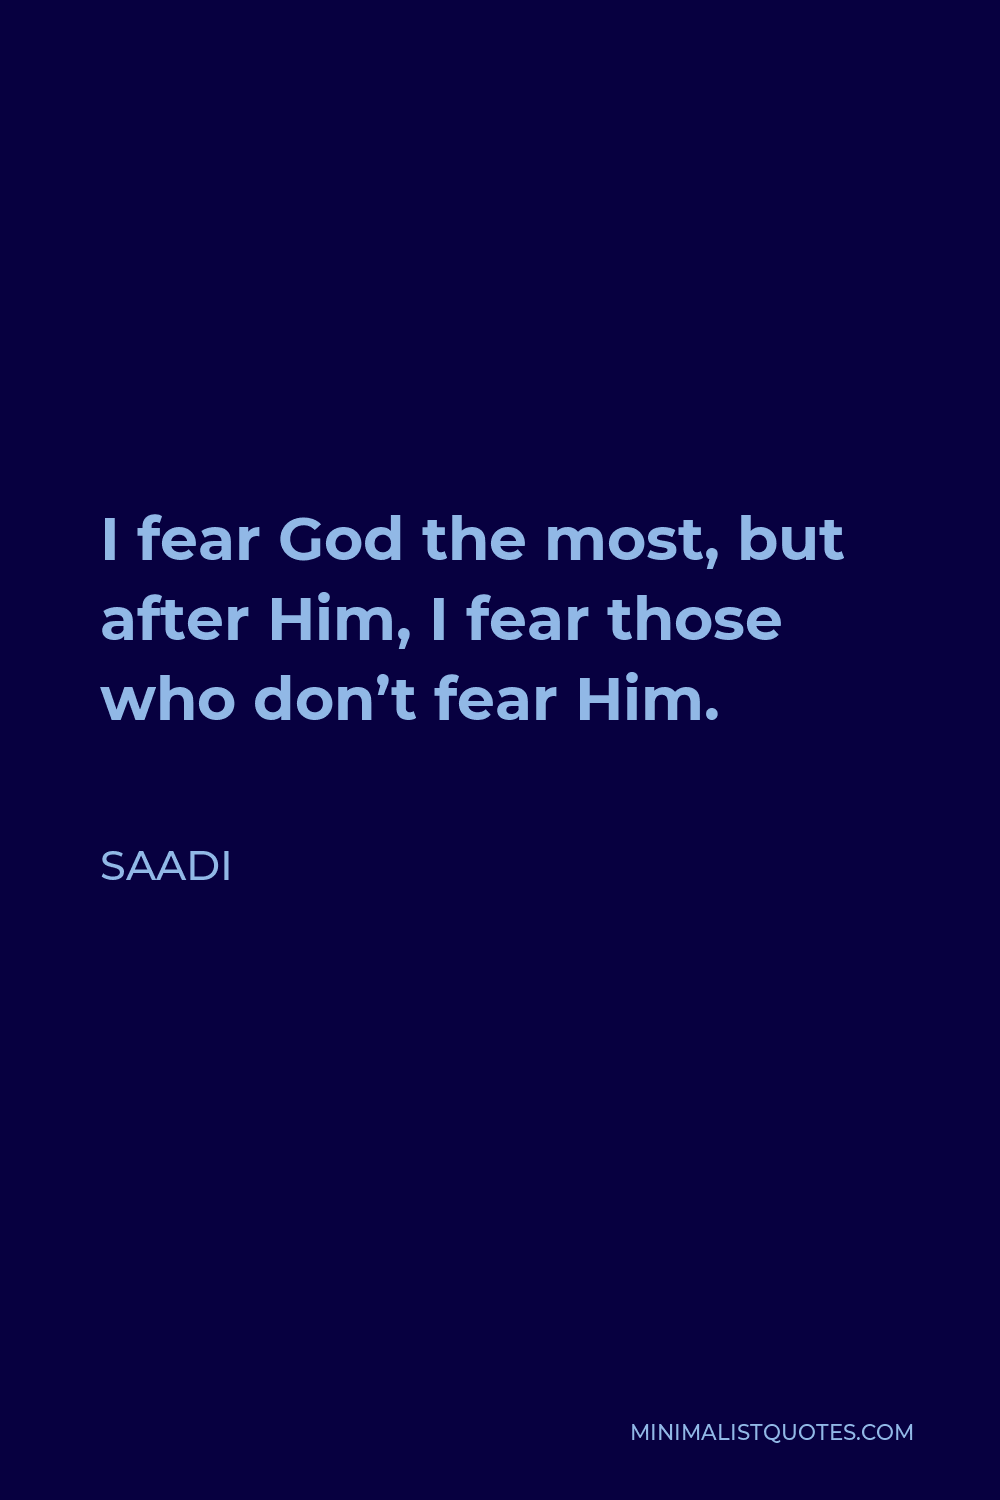 Saadi Quote - I fear God the most, but after Him, I fear those who don’t fear Him.